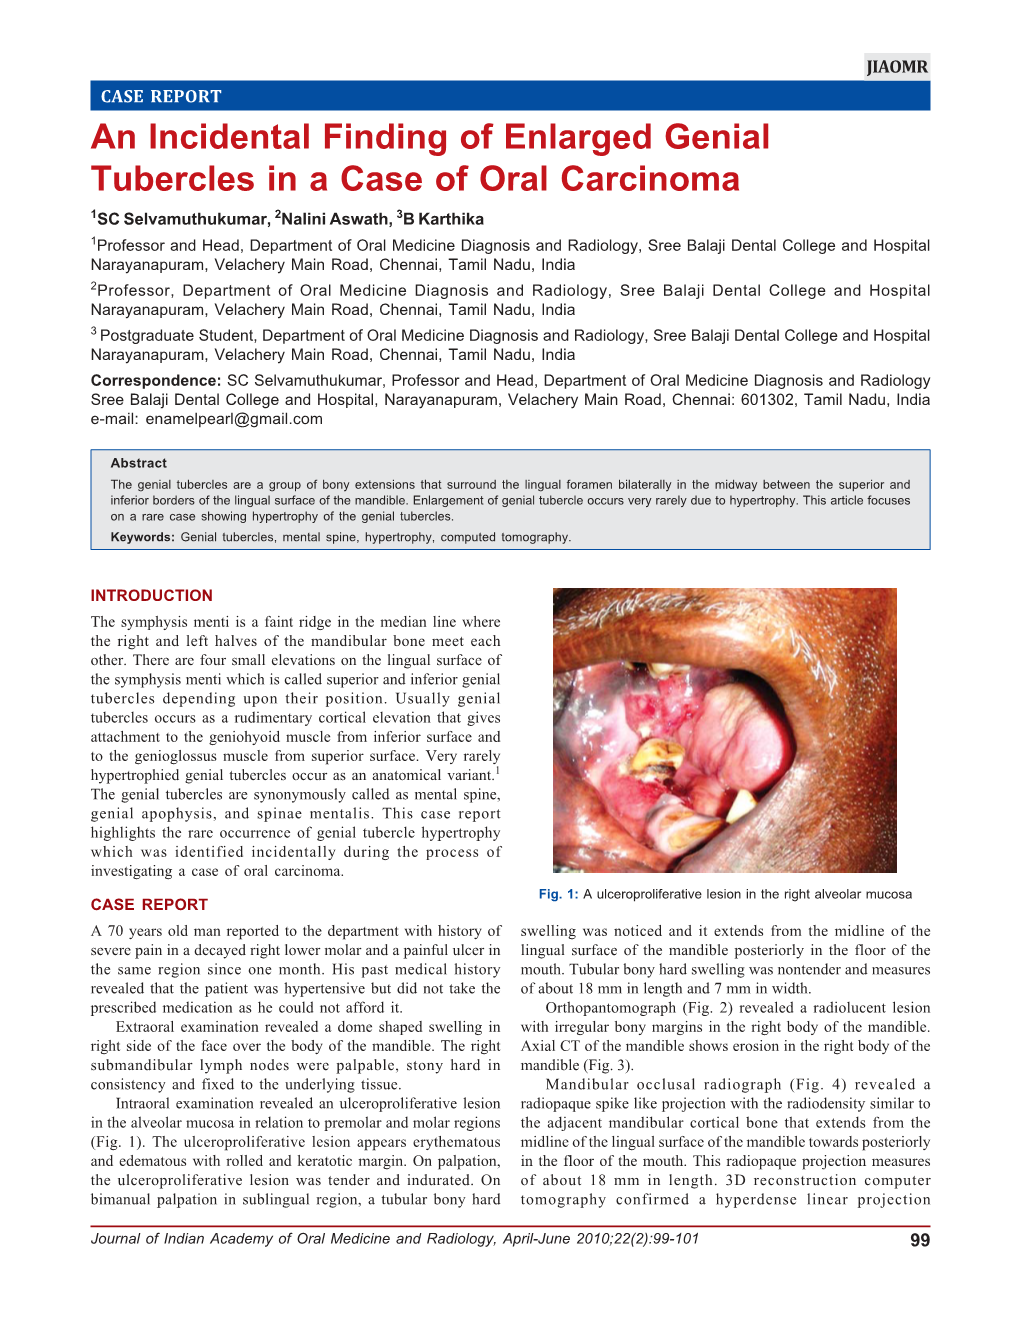 An Incidental Finding of Enlarged Genial Tubercles in a Case of Oral